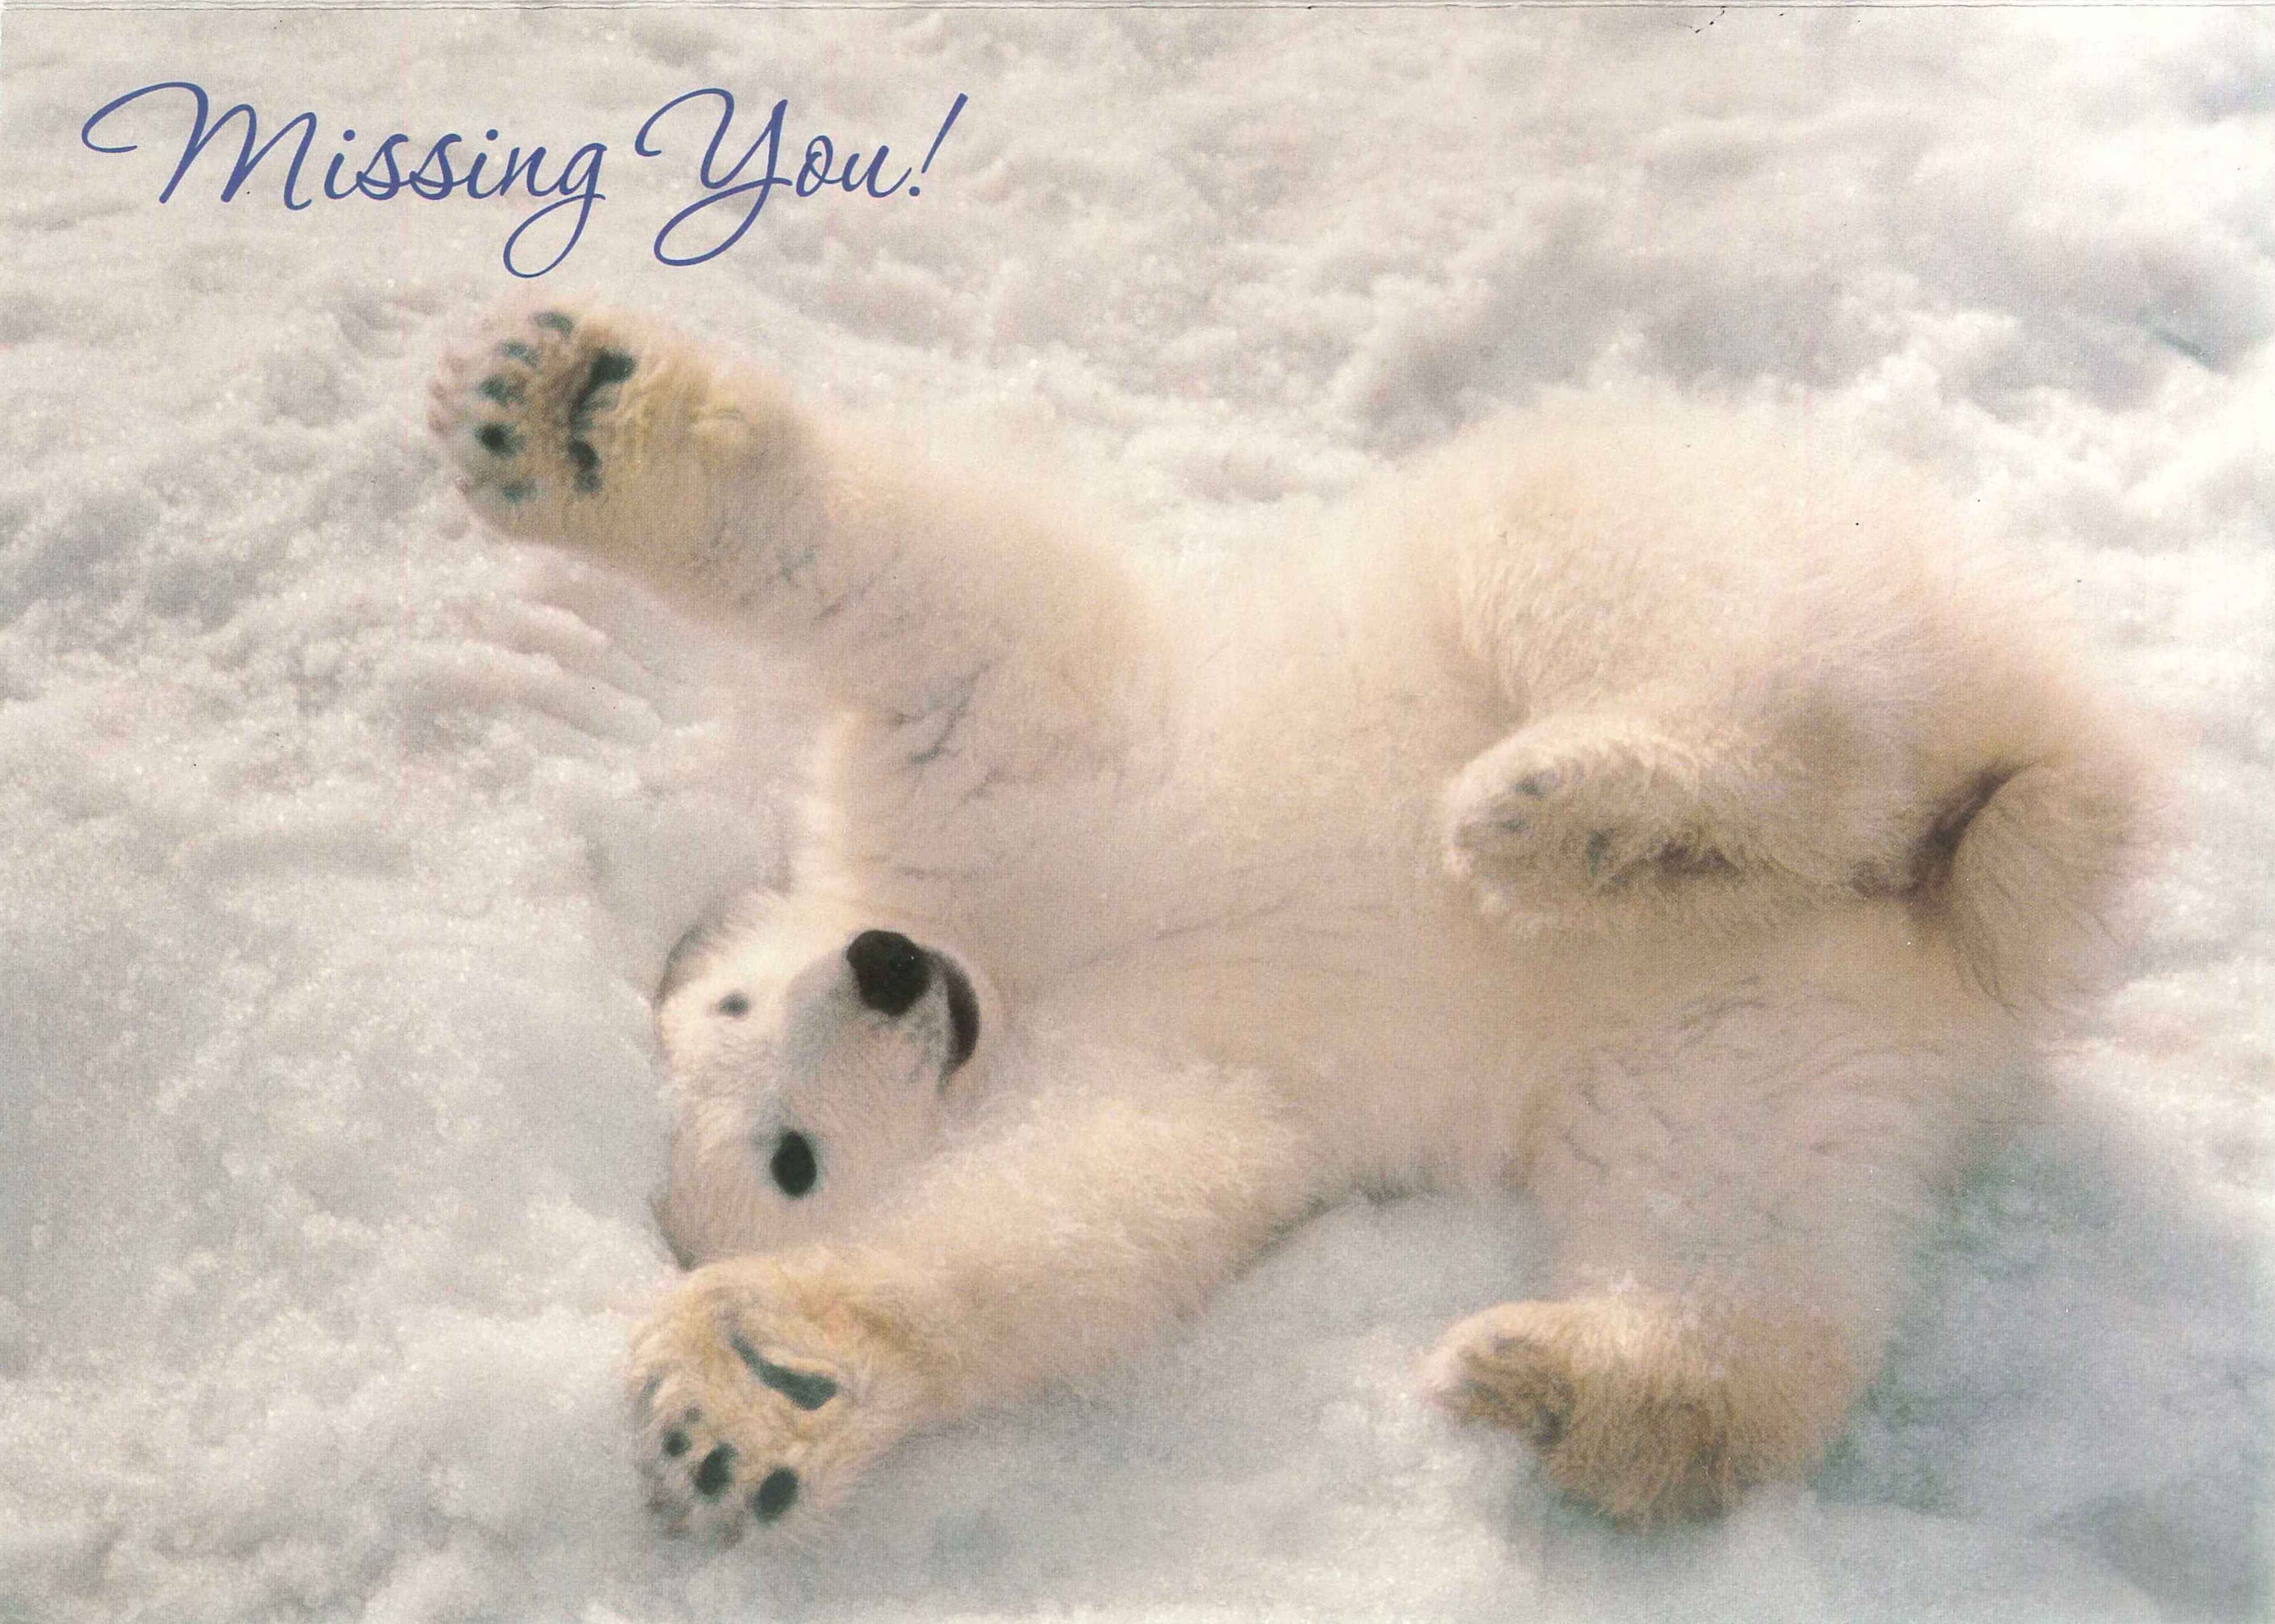 Missing you card with frolicking polar bear on its back in the snow.